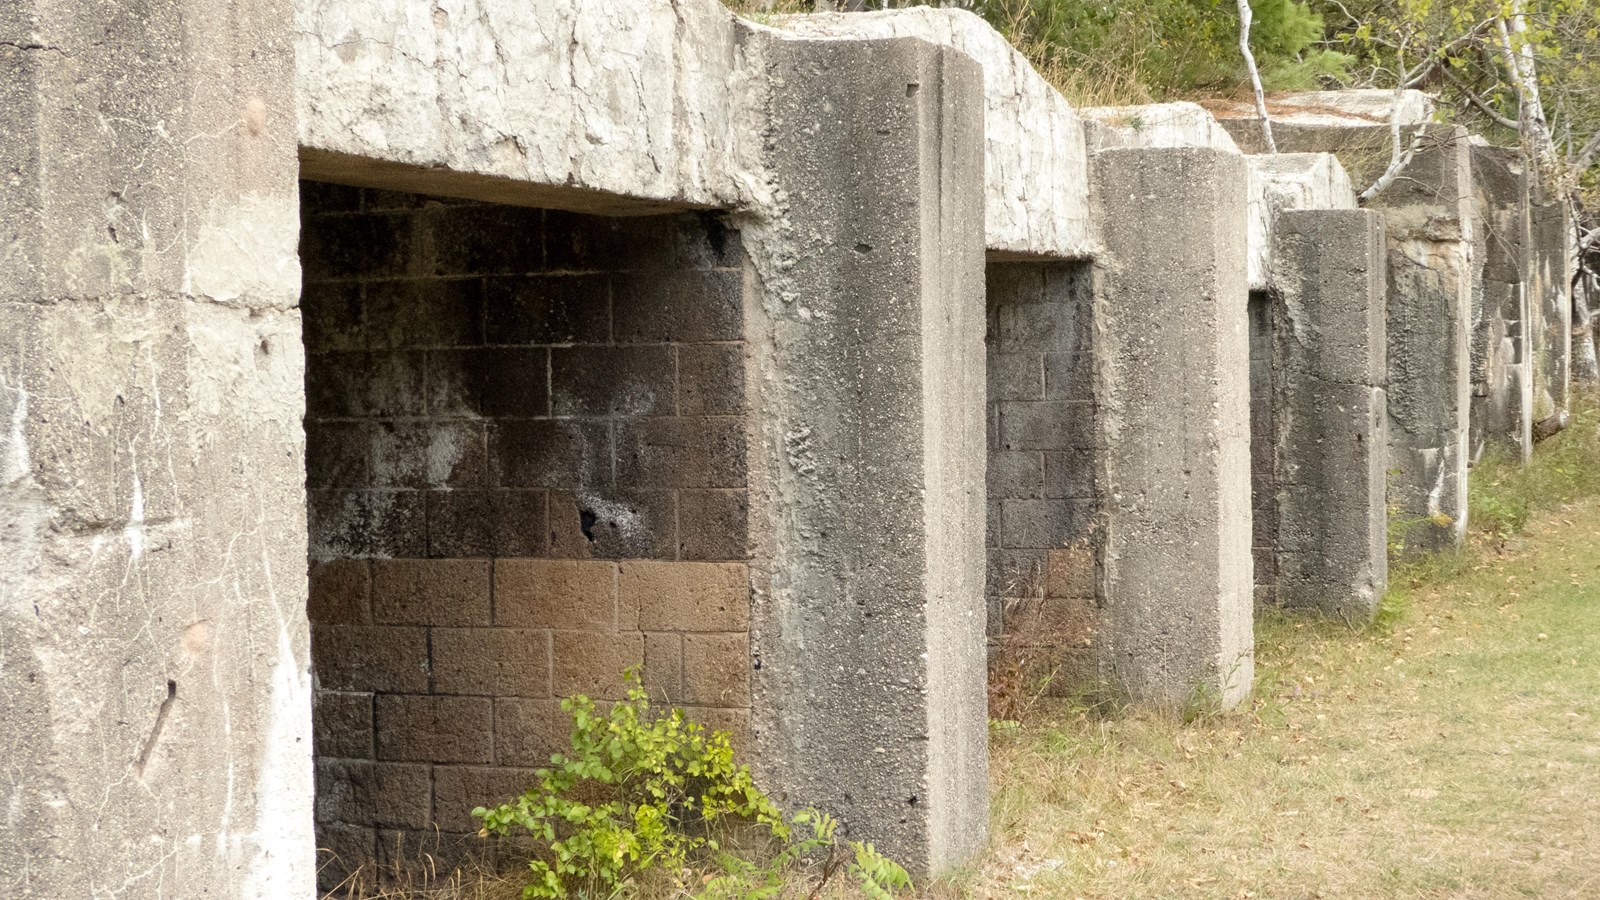 A row of low, connected concrete structures with square openings into each